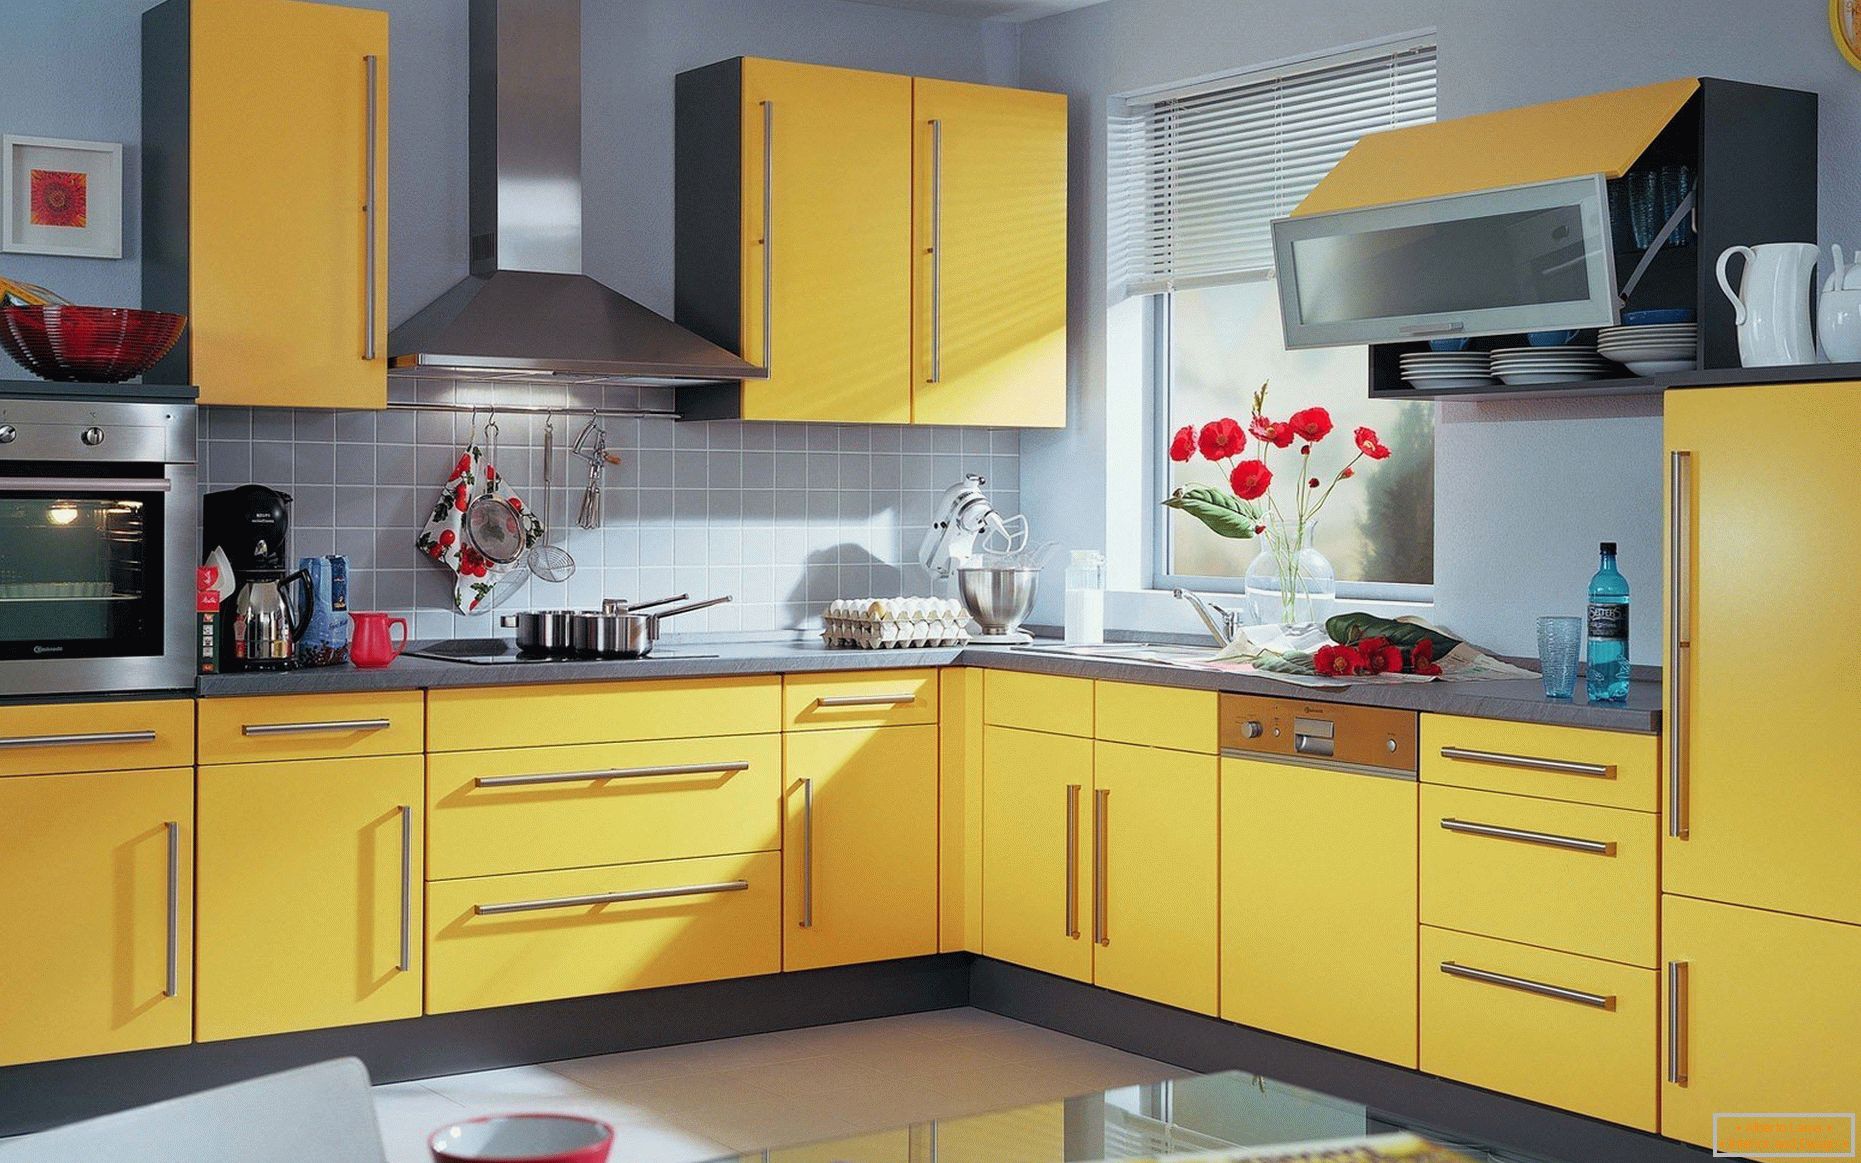 Walls in pastel colors, yellow kitchen